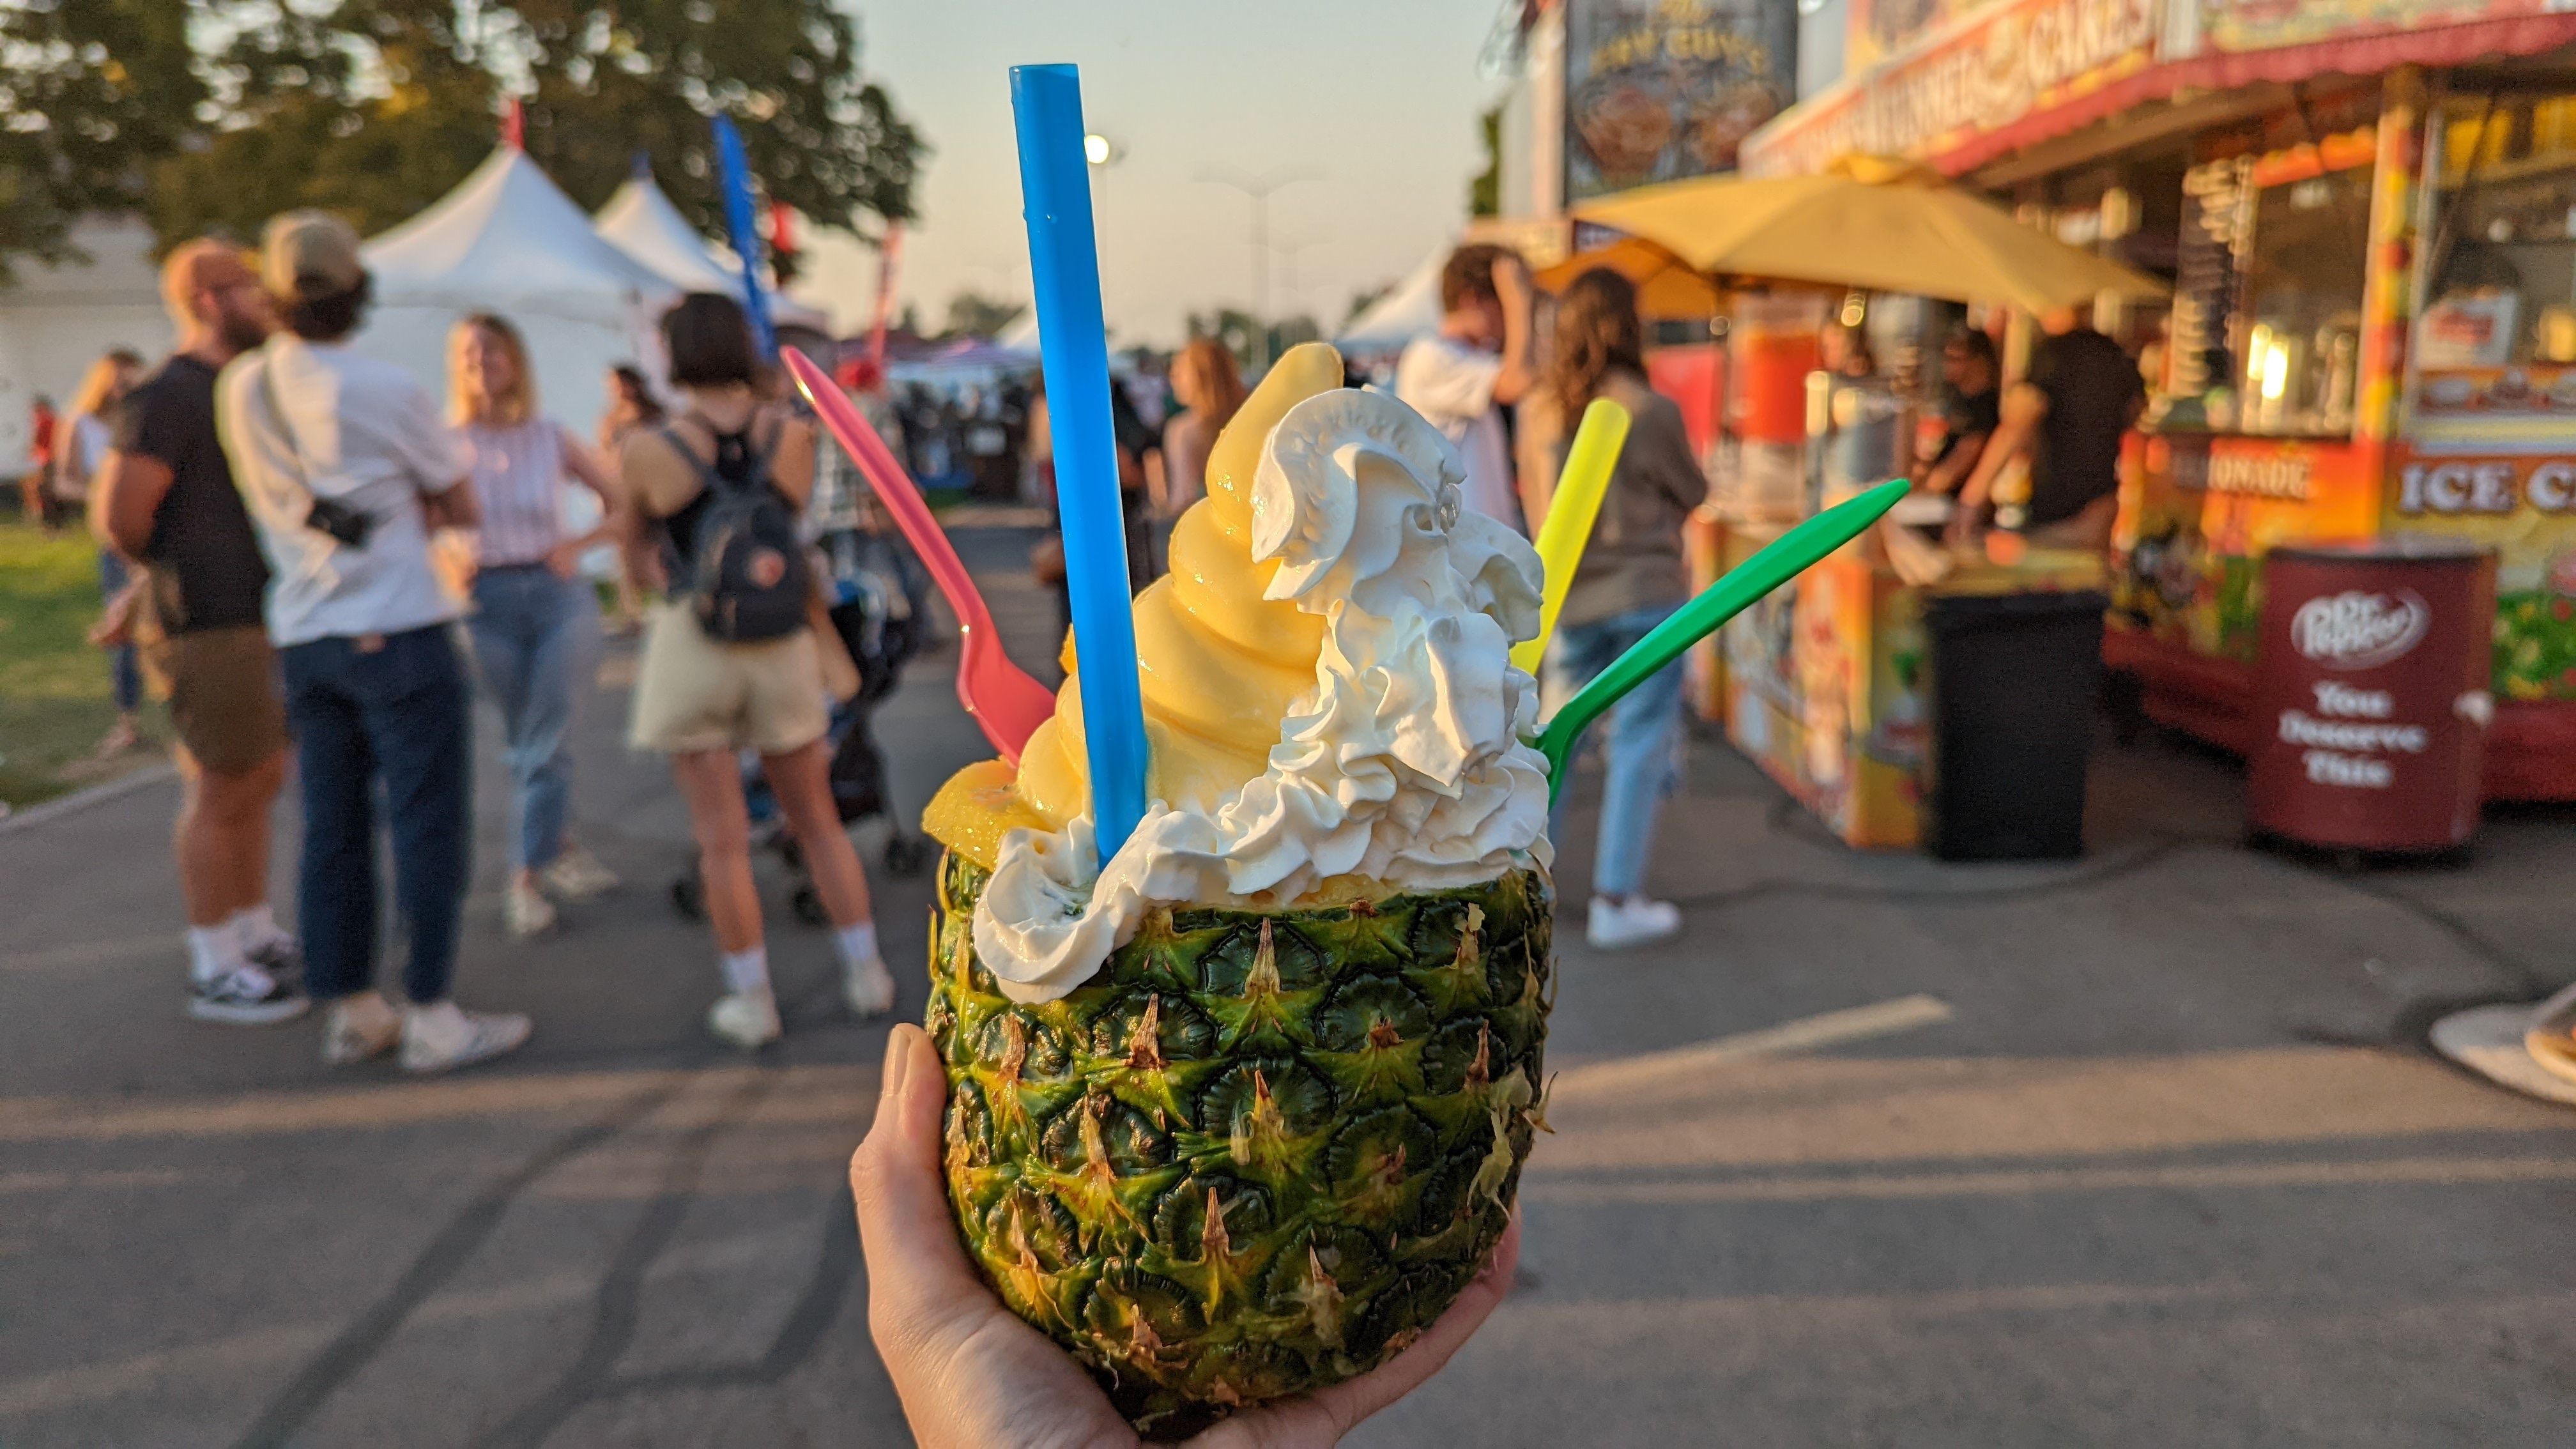 A pineapple is hollowed out to hold ice cream at a carnival.